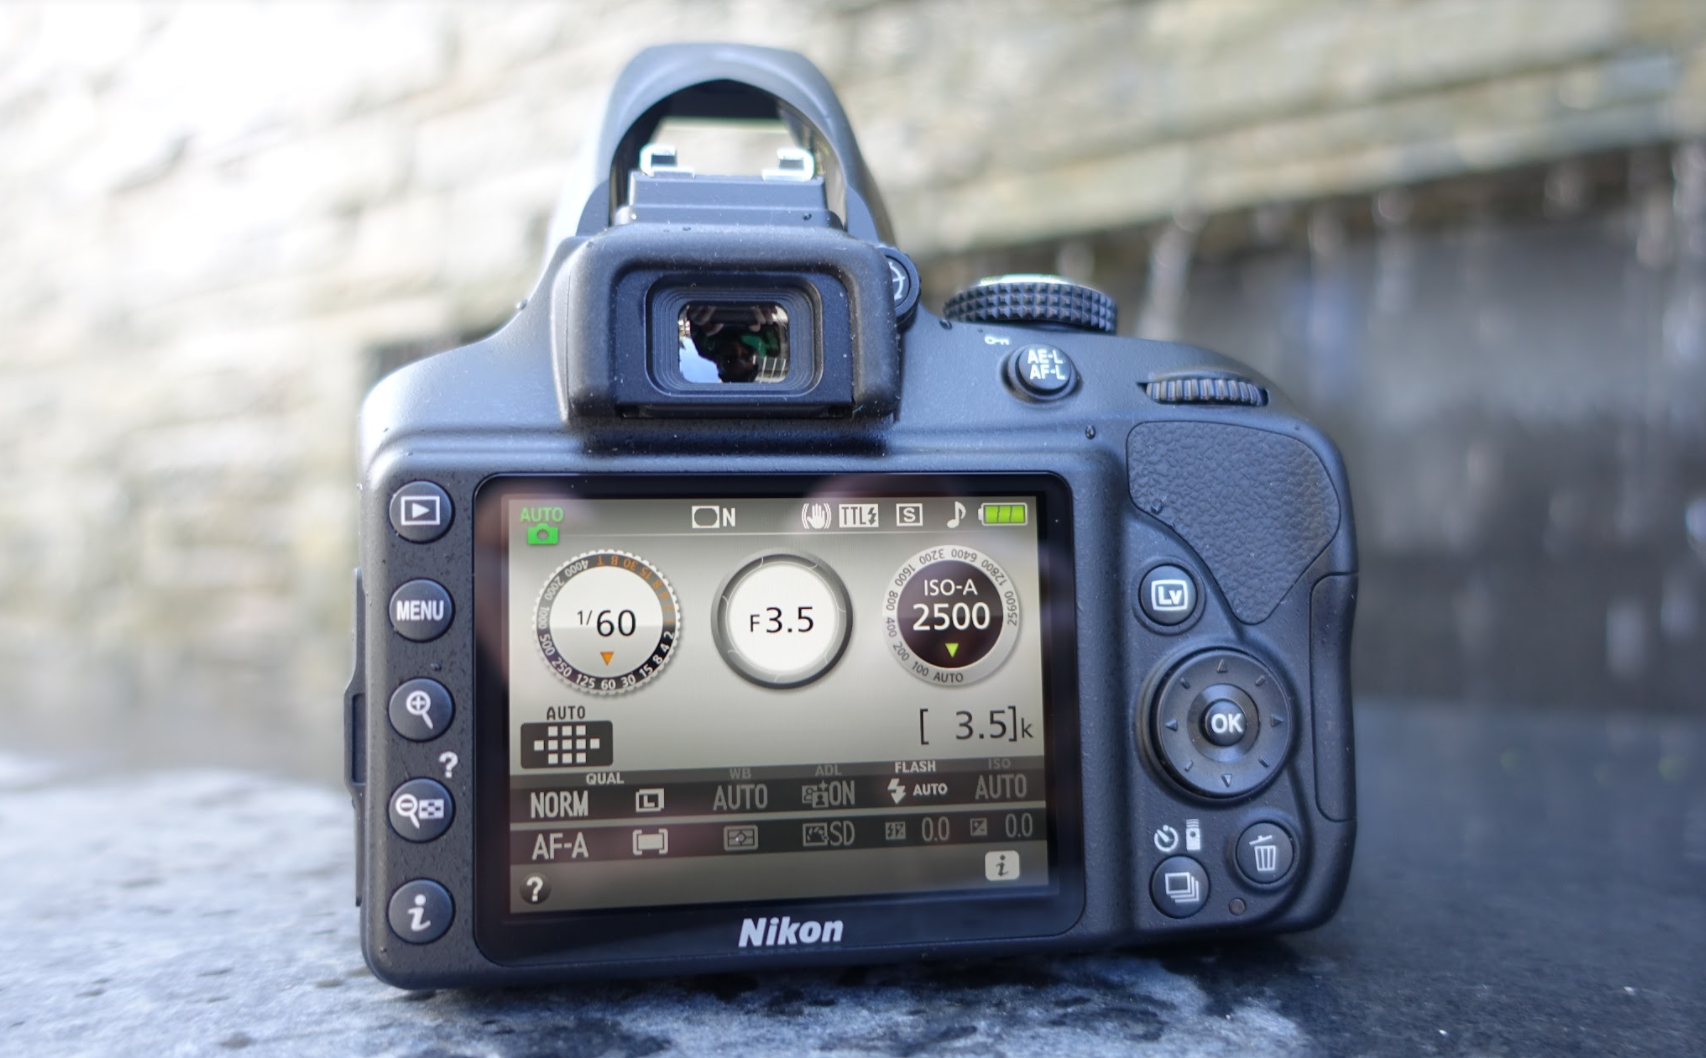 Nikon D3400 Review: This Entry-Level DSLR Leads Its Price Tier